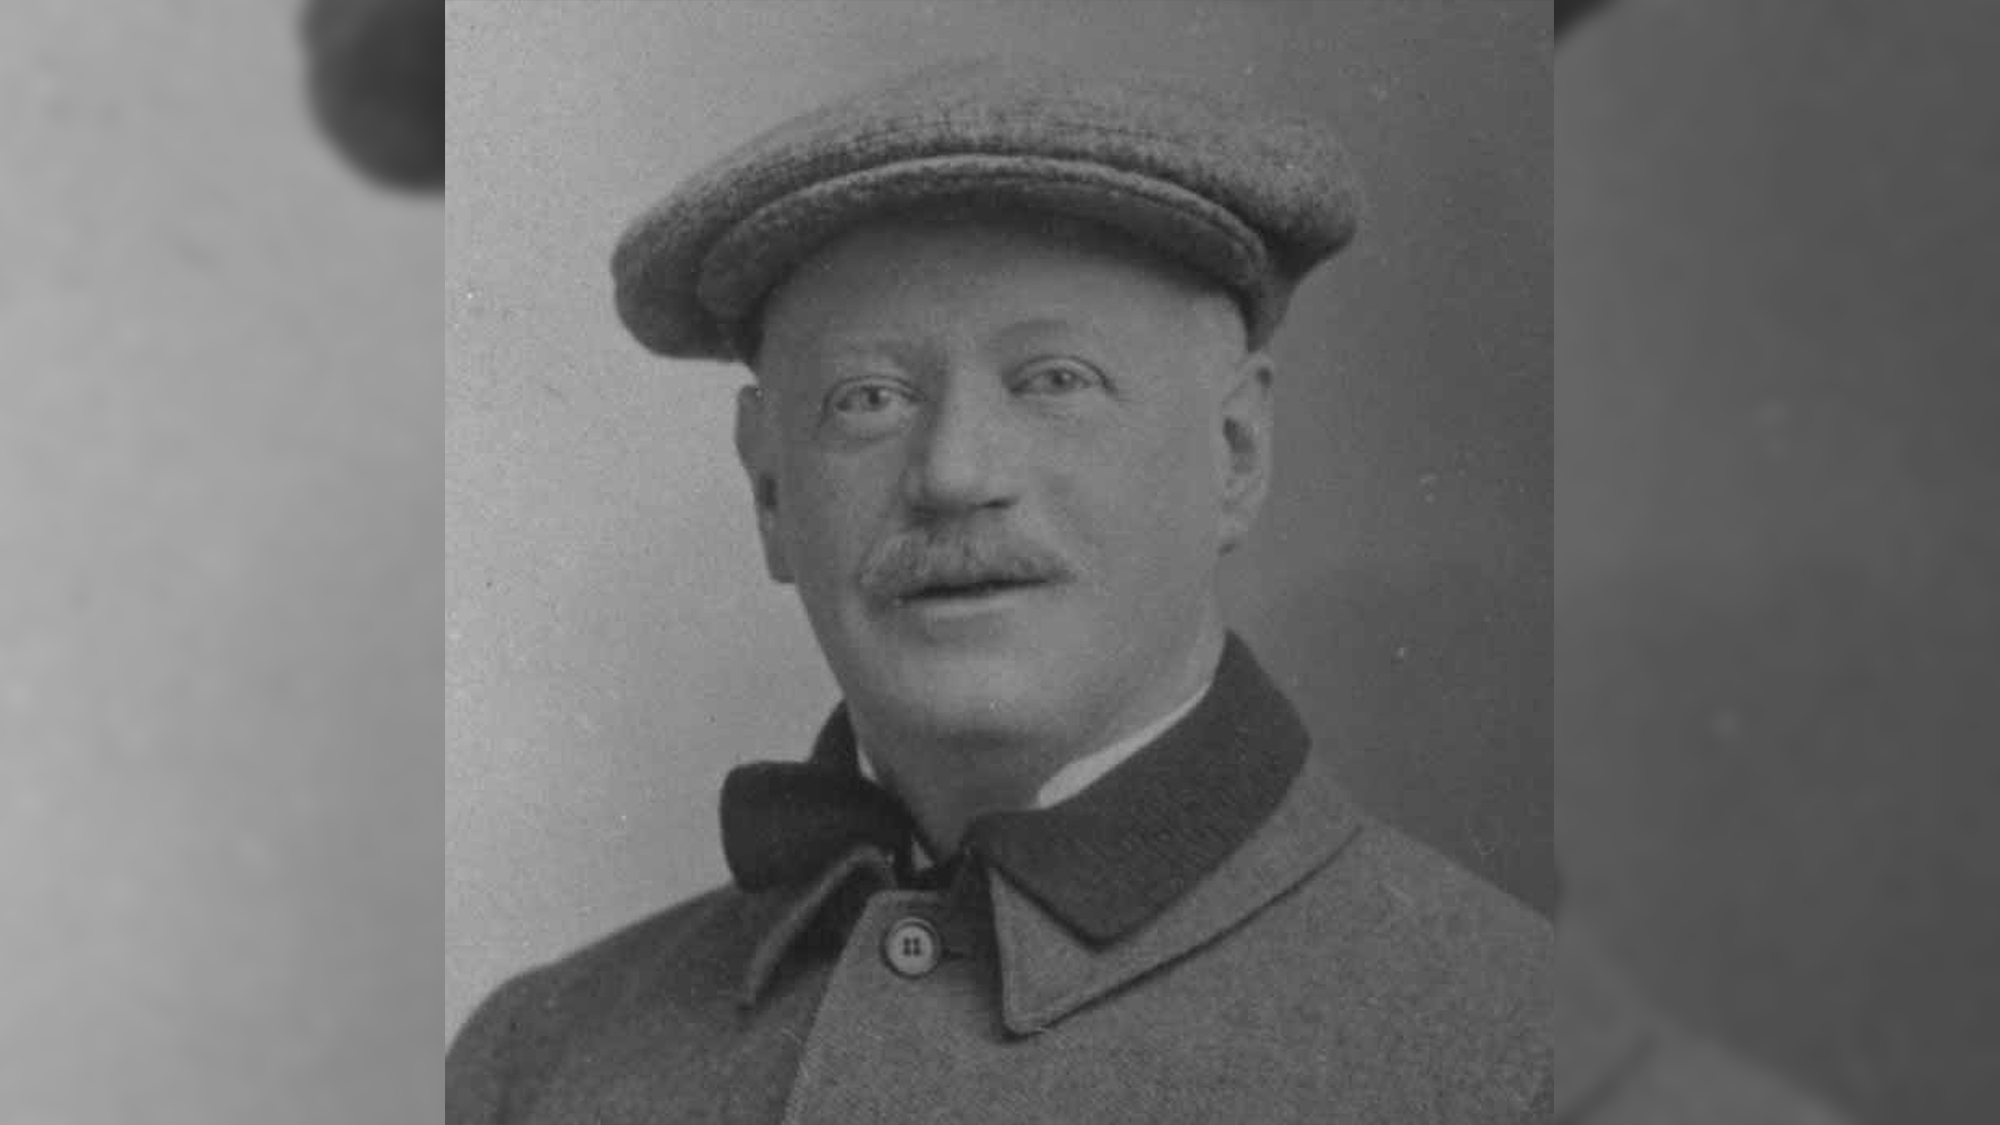 Carl August Kronlund photographed in 1924.